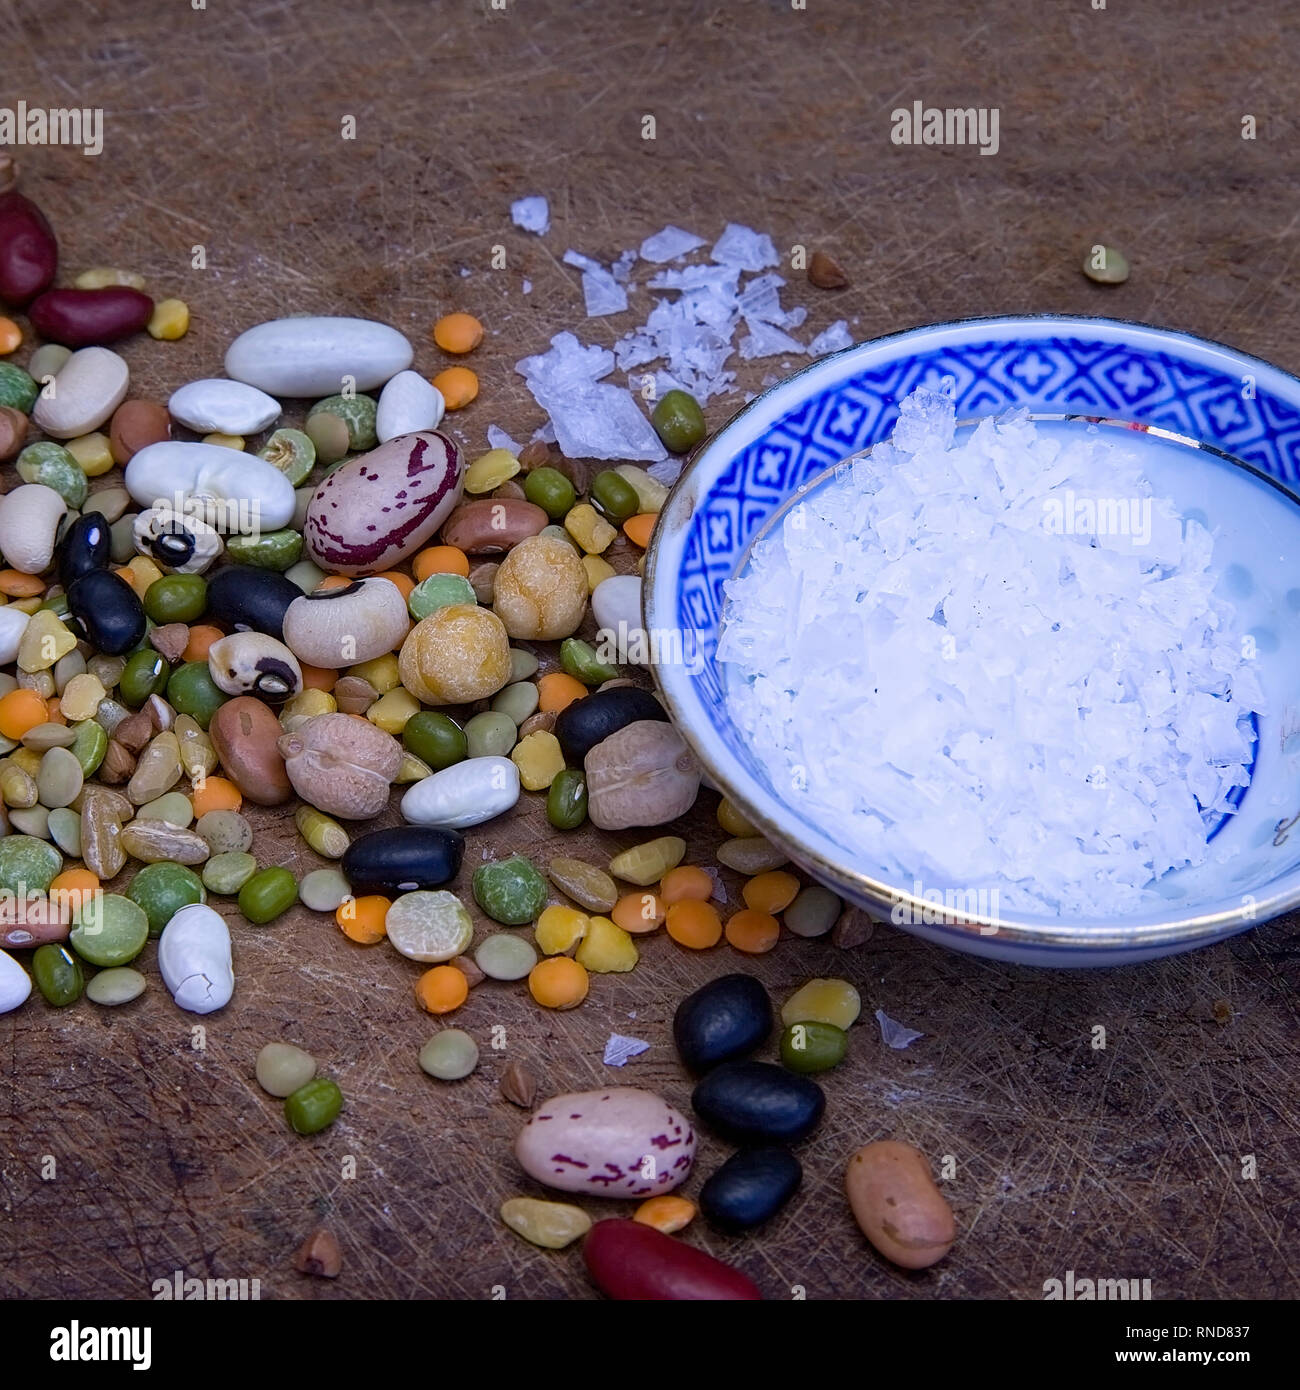 Dried assortment of dry  colourful beans on a wooden surface with a bowl of crystal salt. Stock Image. Stock Photo